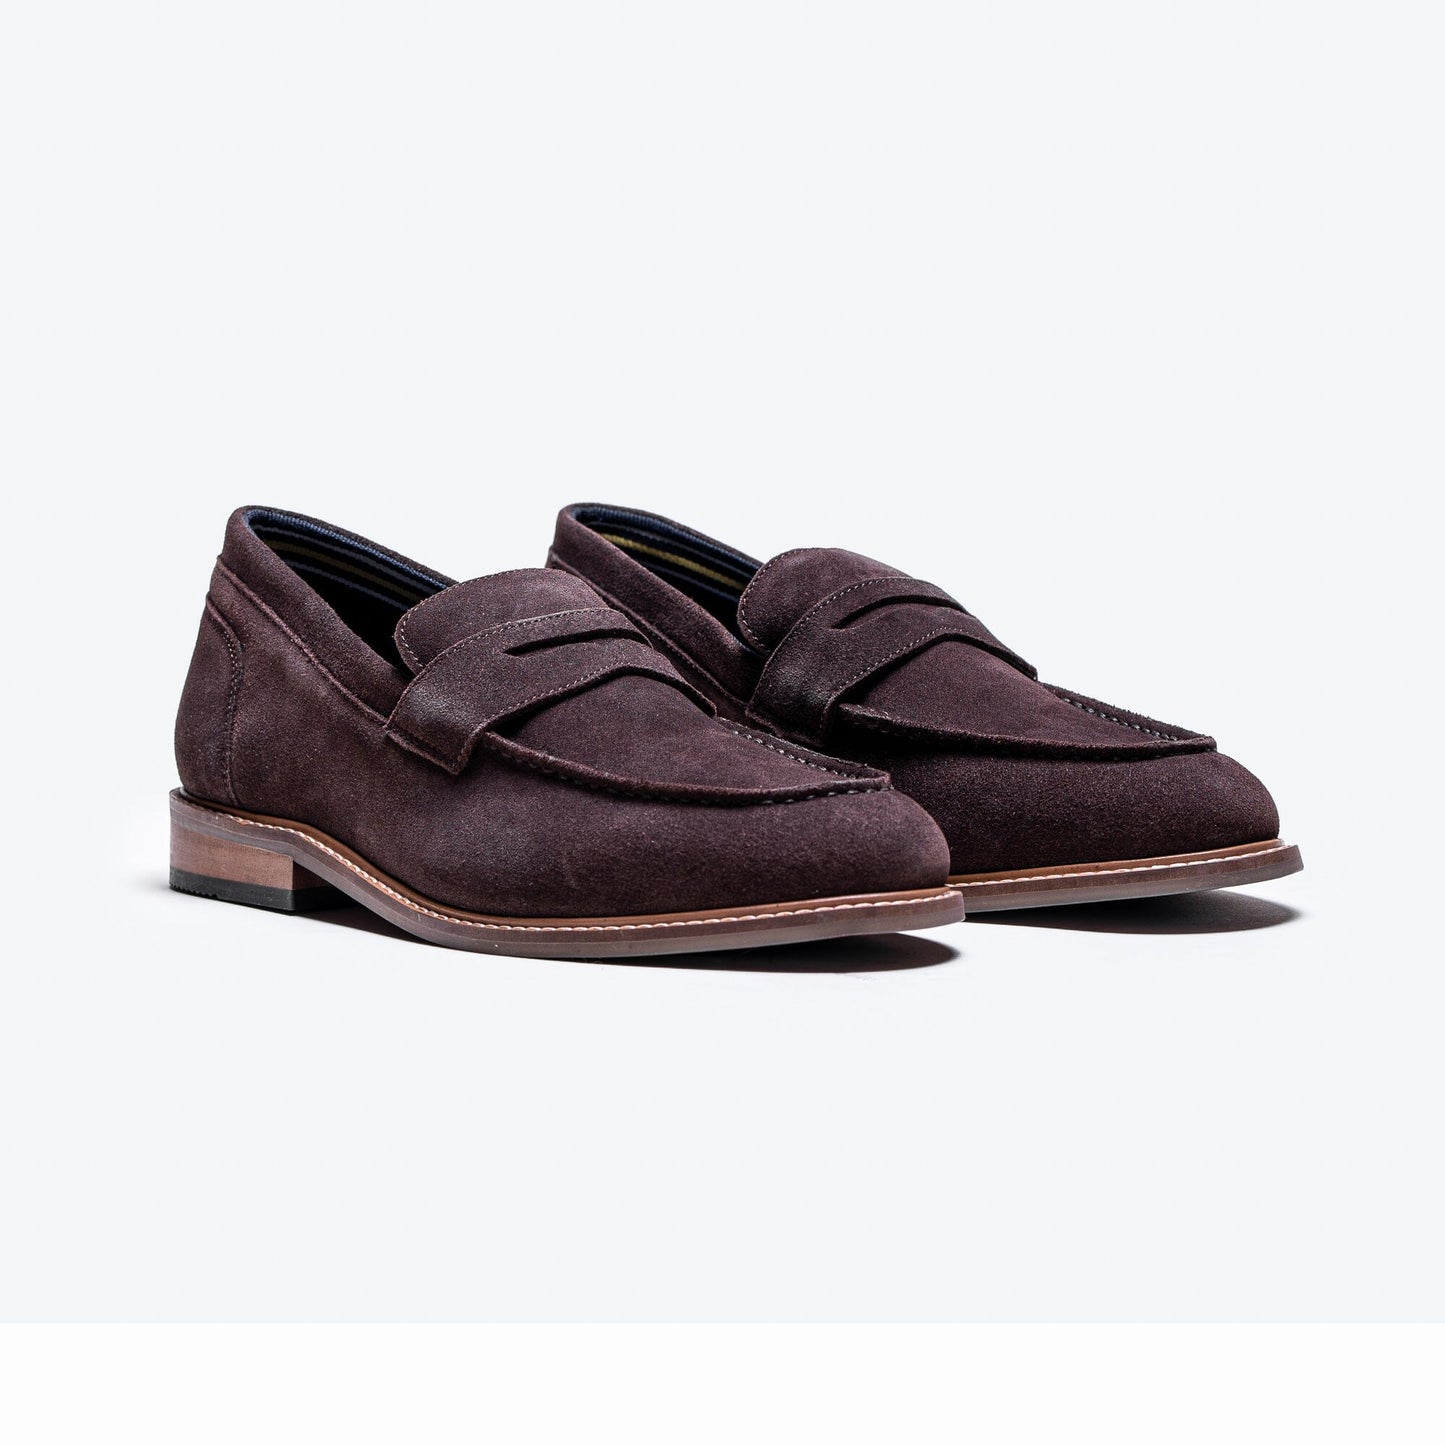 Jordan Brown Suede Loafers - Shoes - - THREADPEPPER